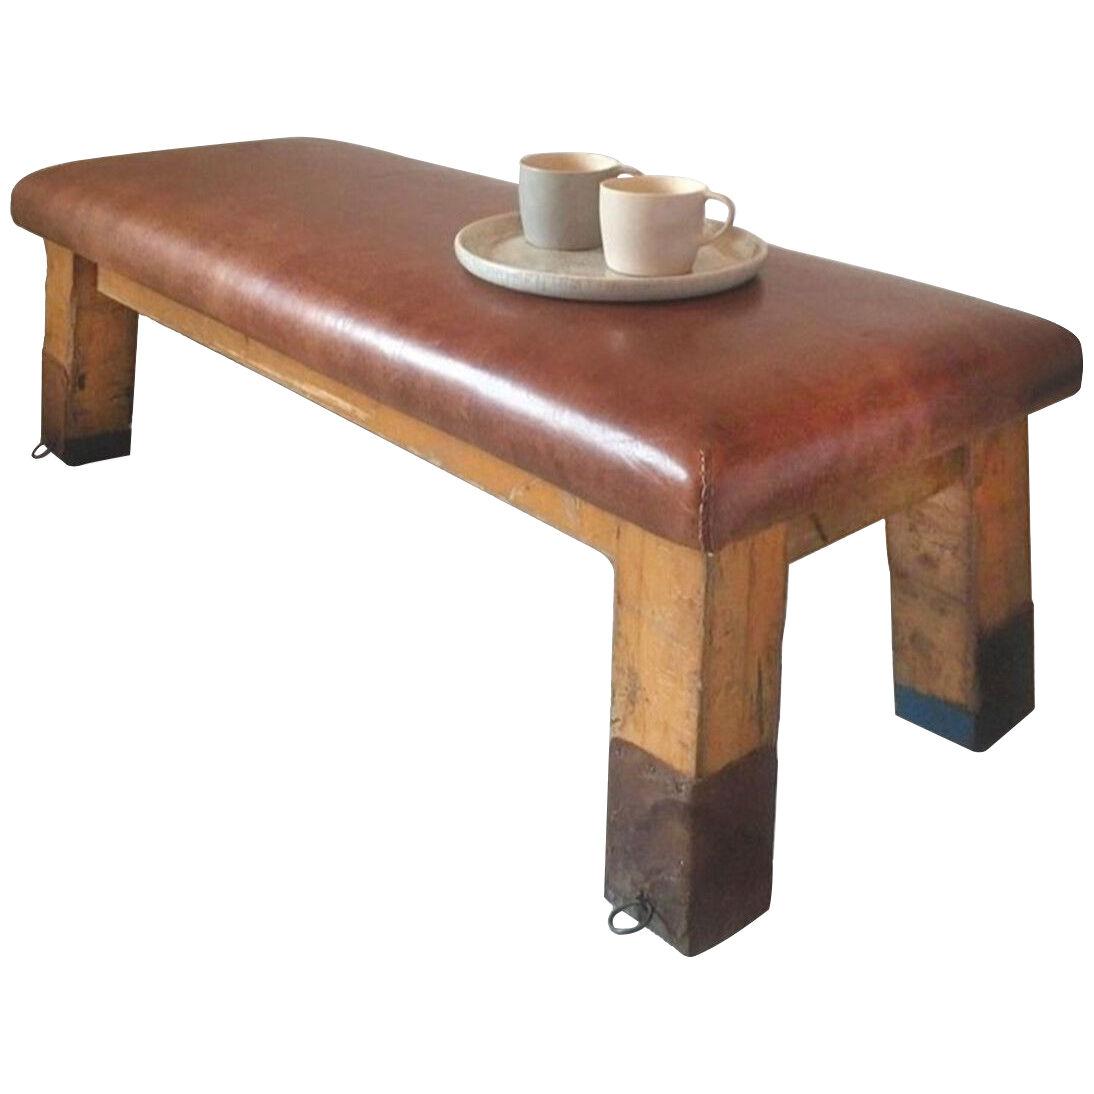 A 1930's Exercise Bench Coffee Table